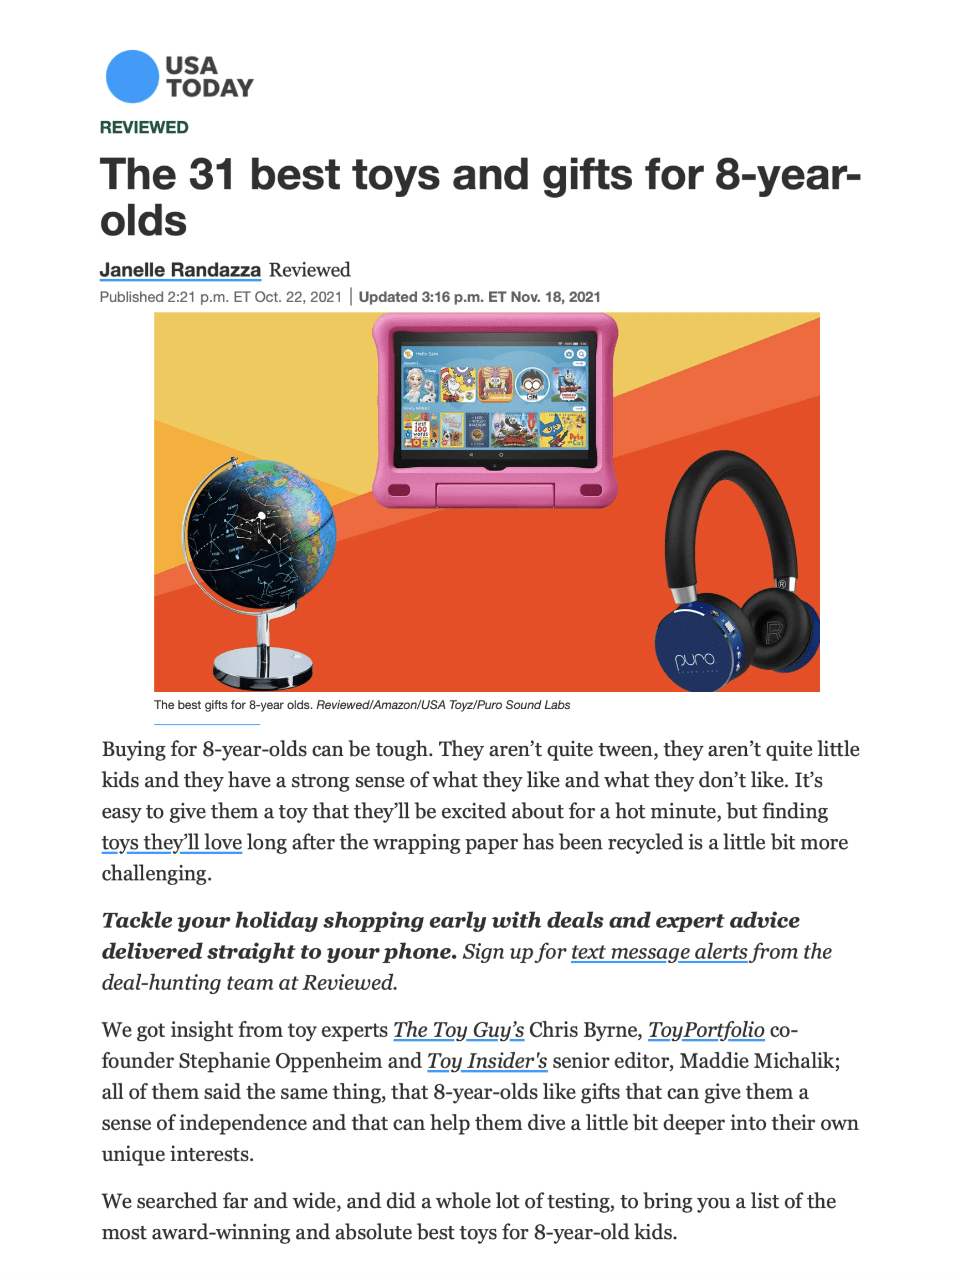 Republished on Yahoo! Life
The 31 Best Toys and Gifts for 8-Year-Olds
Featured Brands include:Puro Sound Labs

Read More